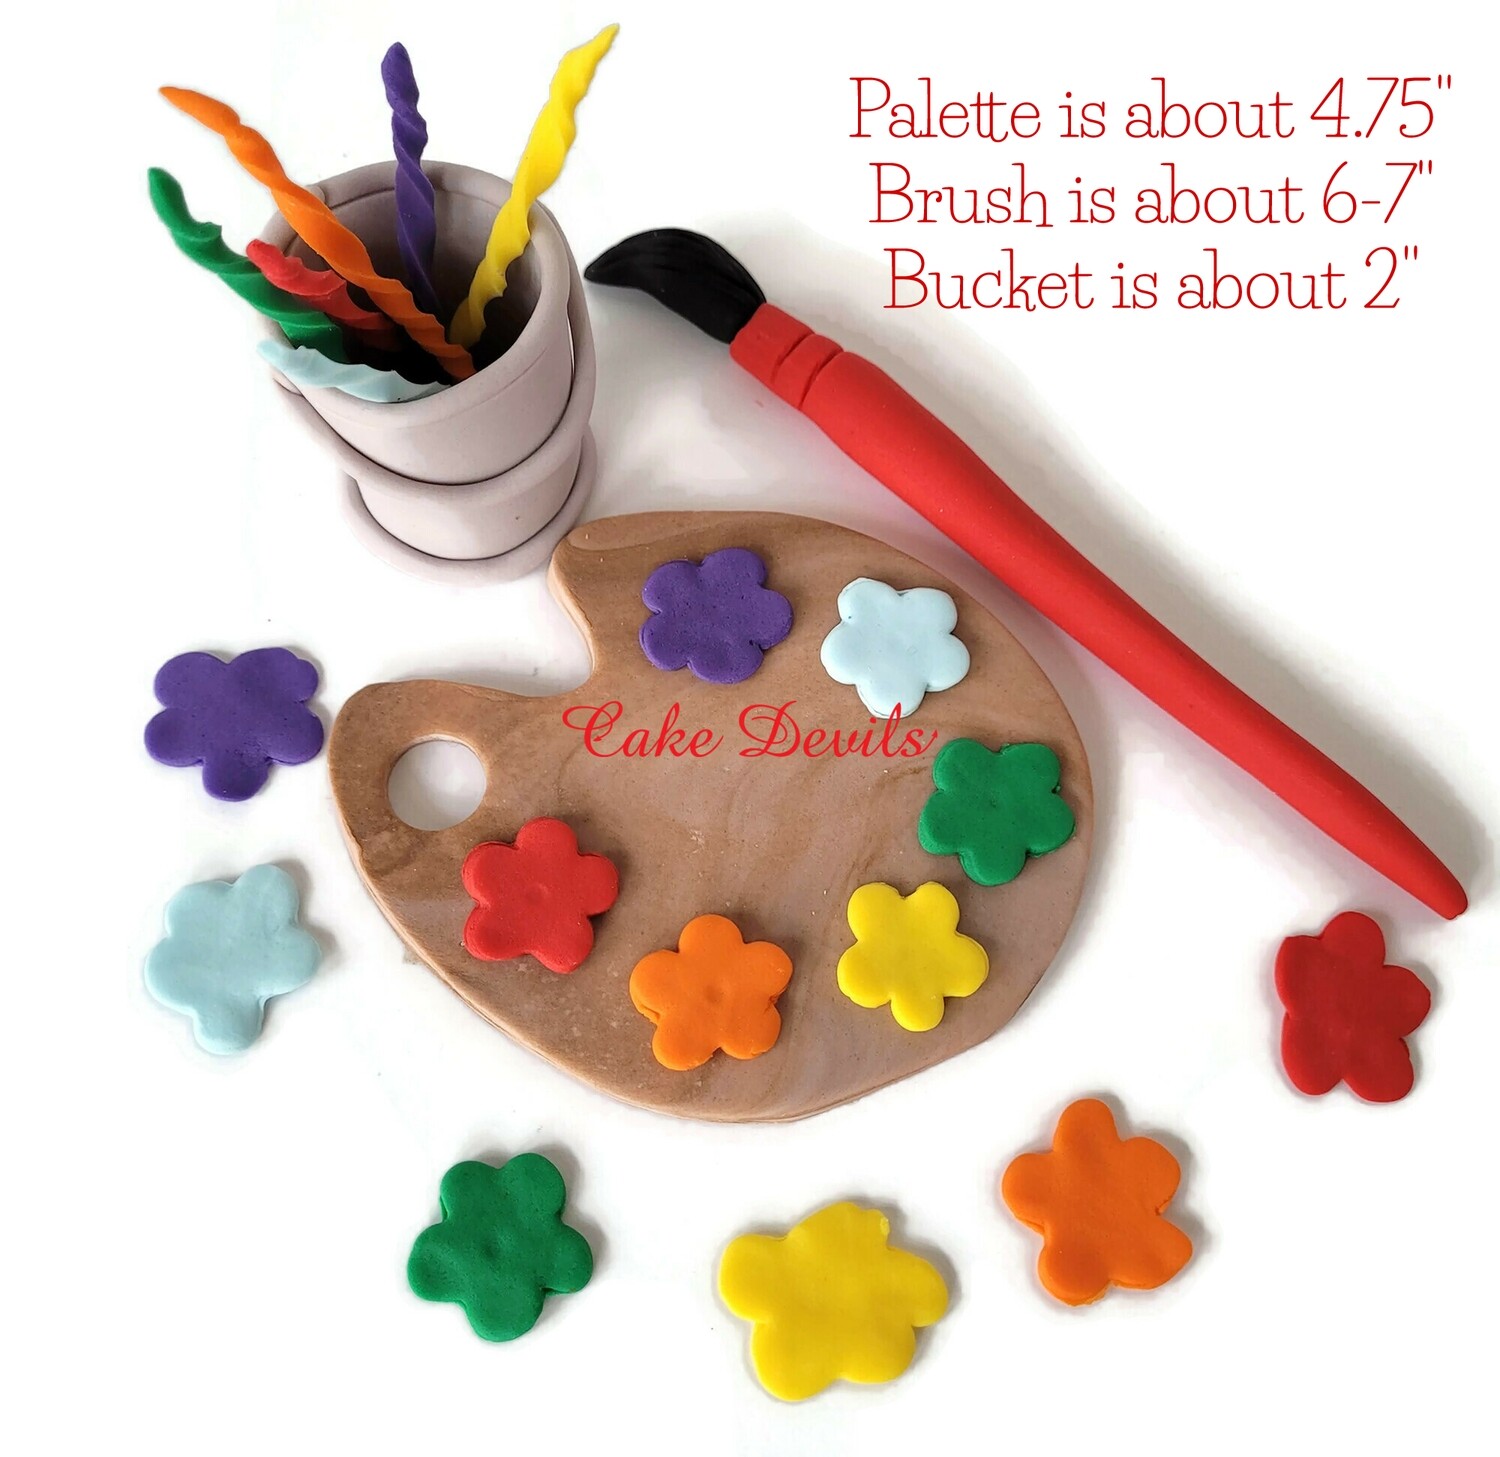 Fondant Art Cake Toppers with Paint Palette, Brush, and Bucket